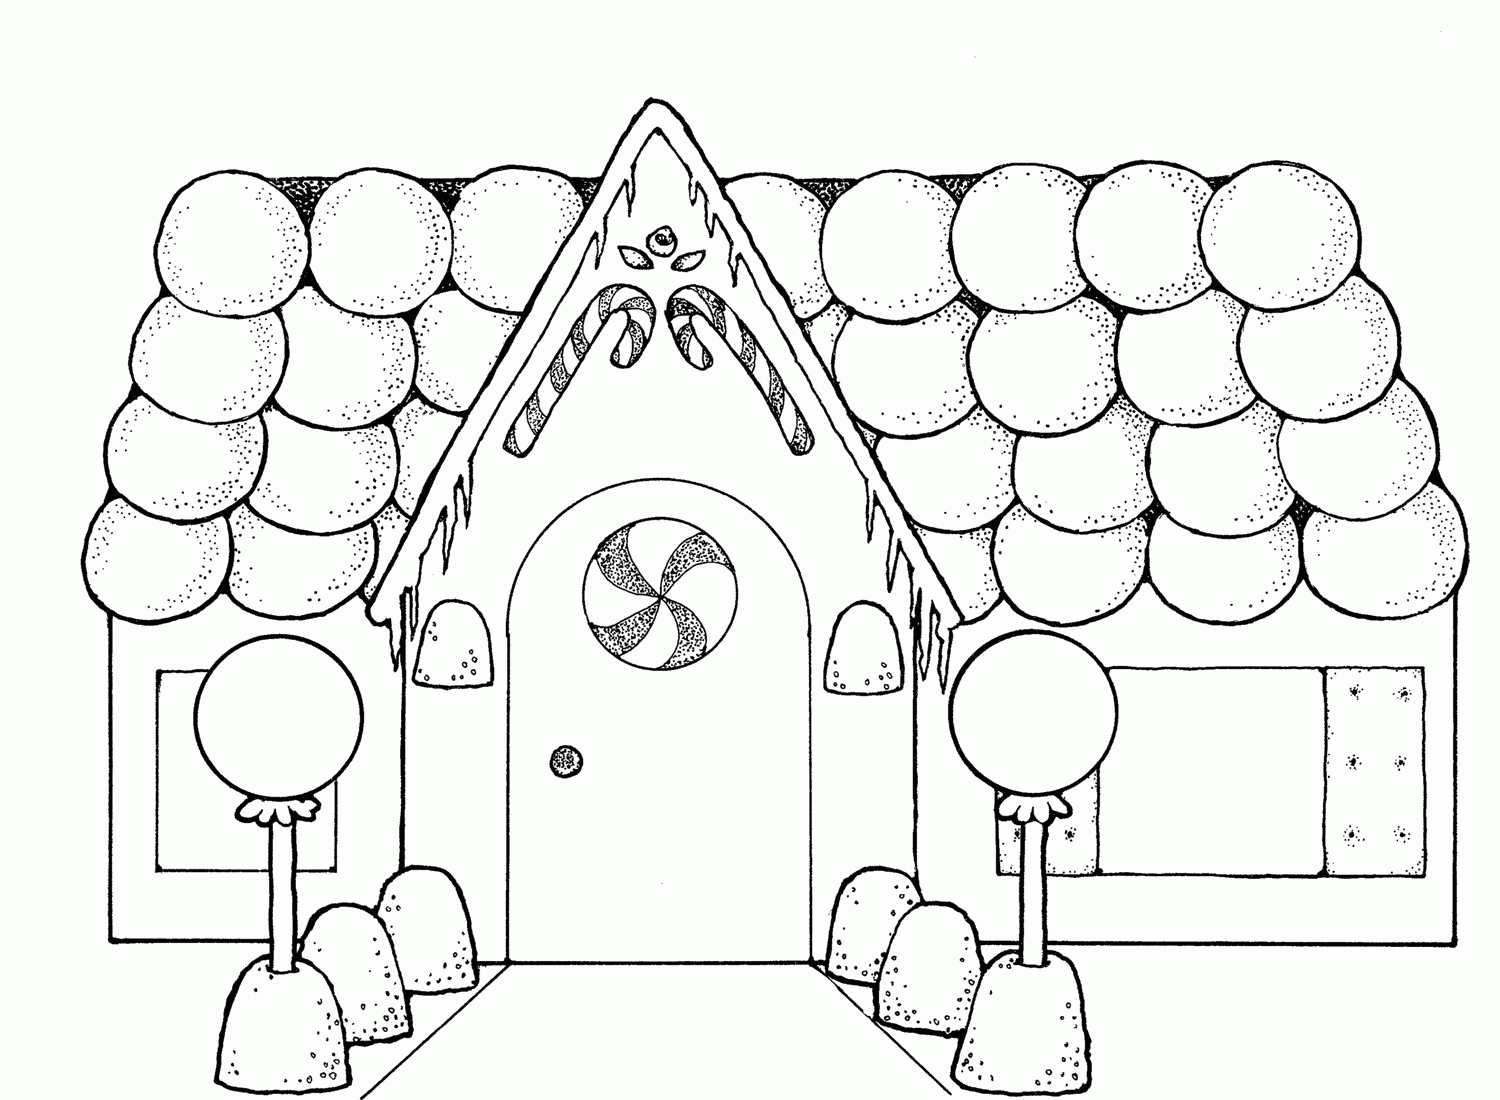 free-gingerbread-house-coloring-page-printable-download-free-gingerbread-house-coloring-page